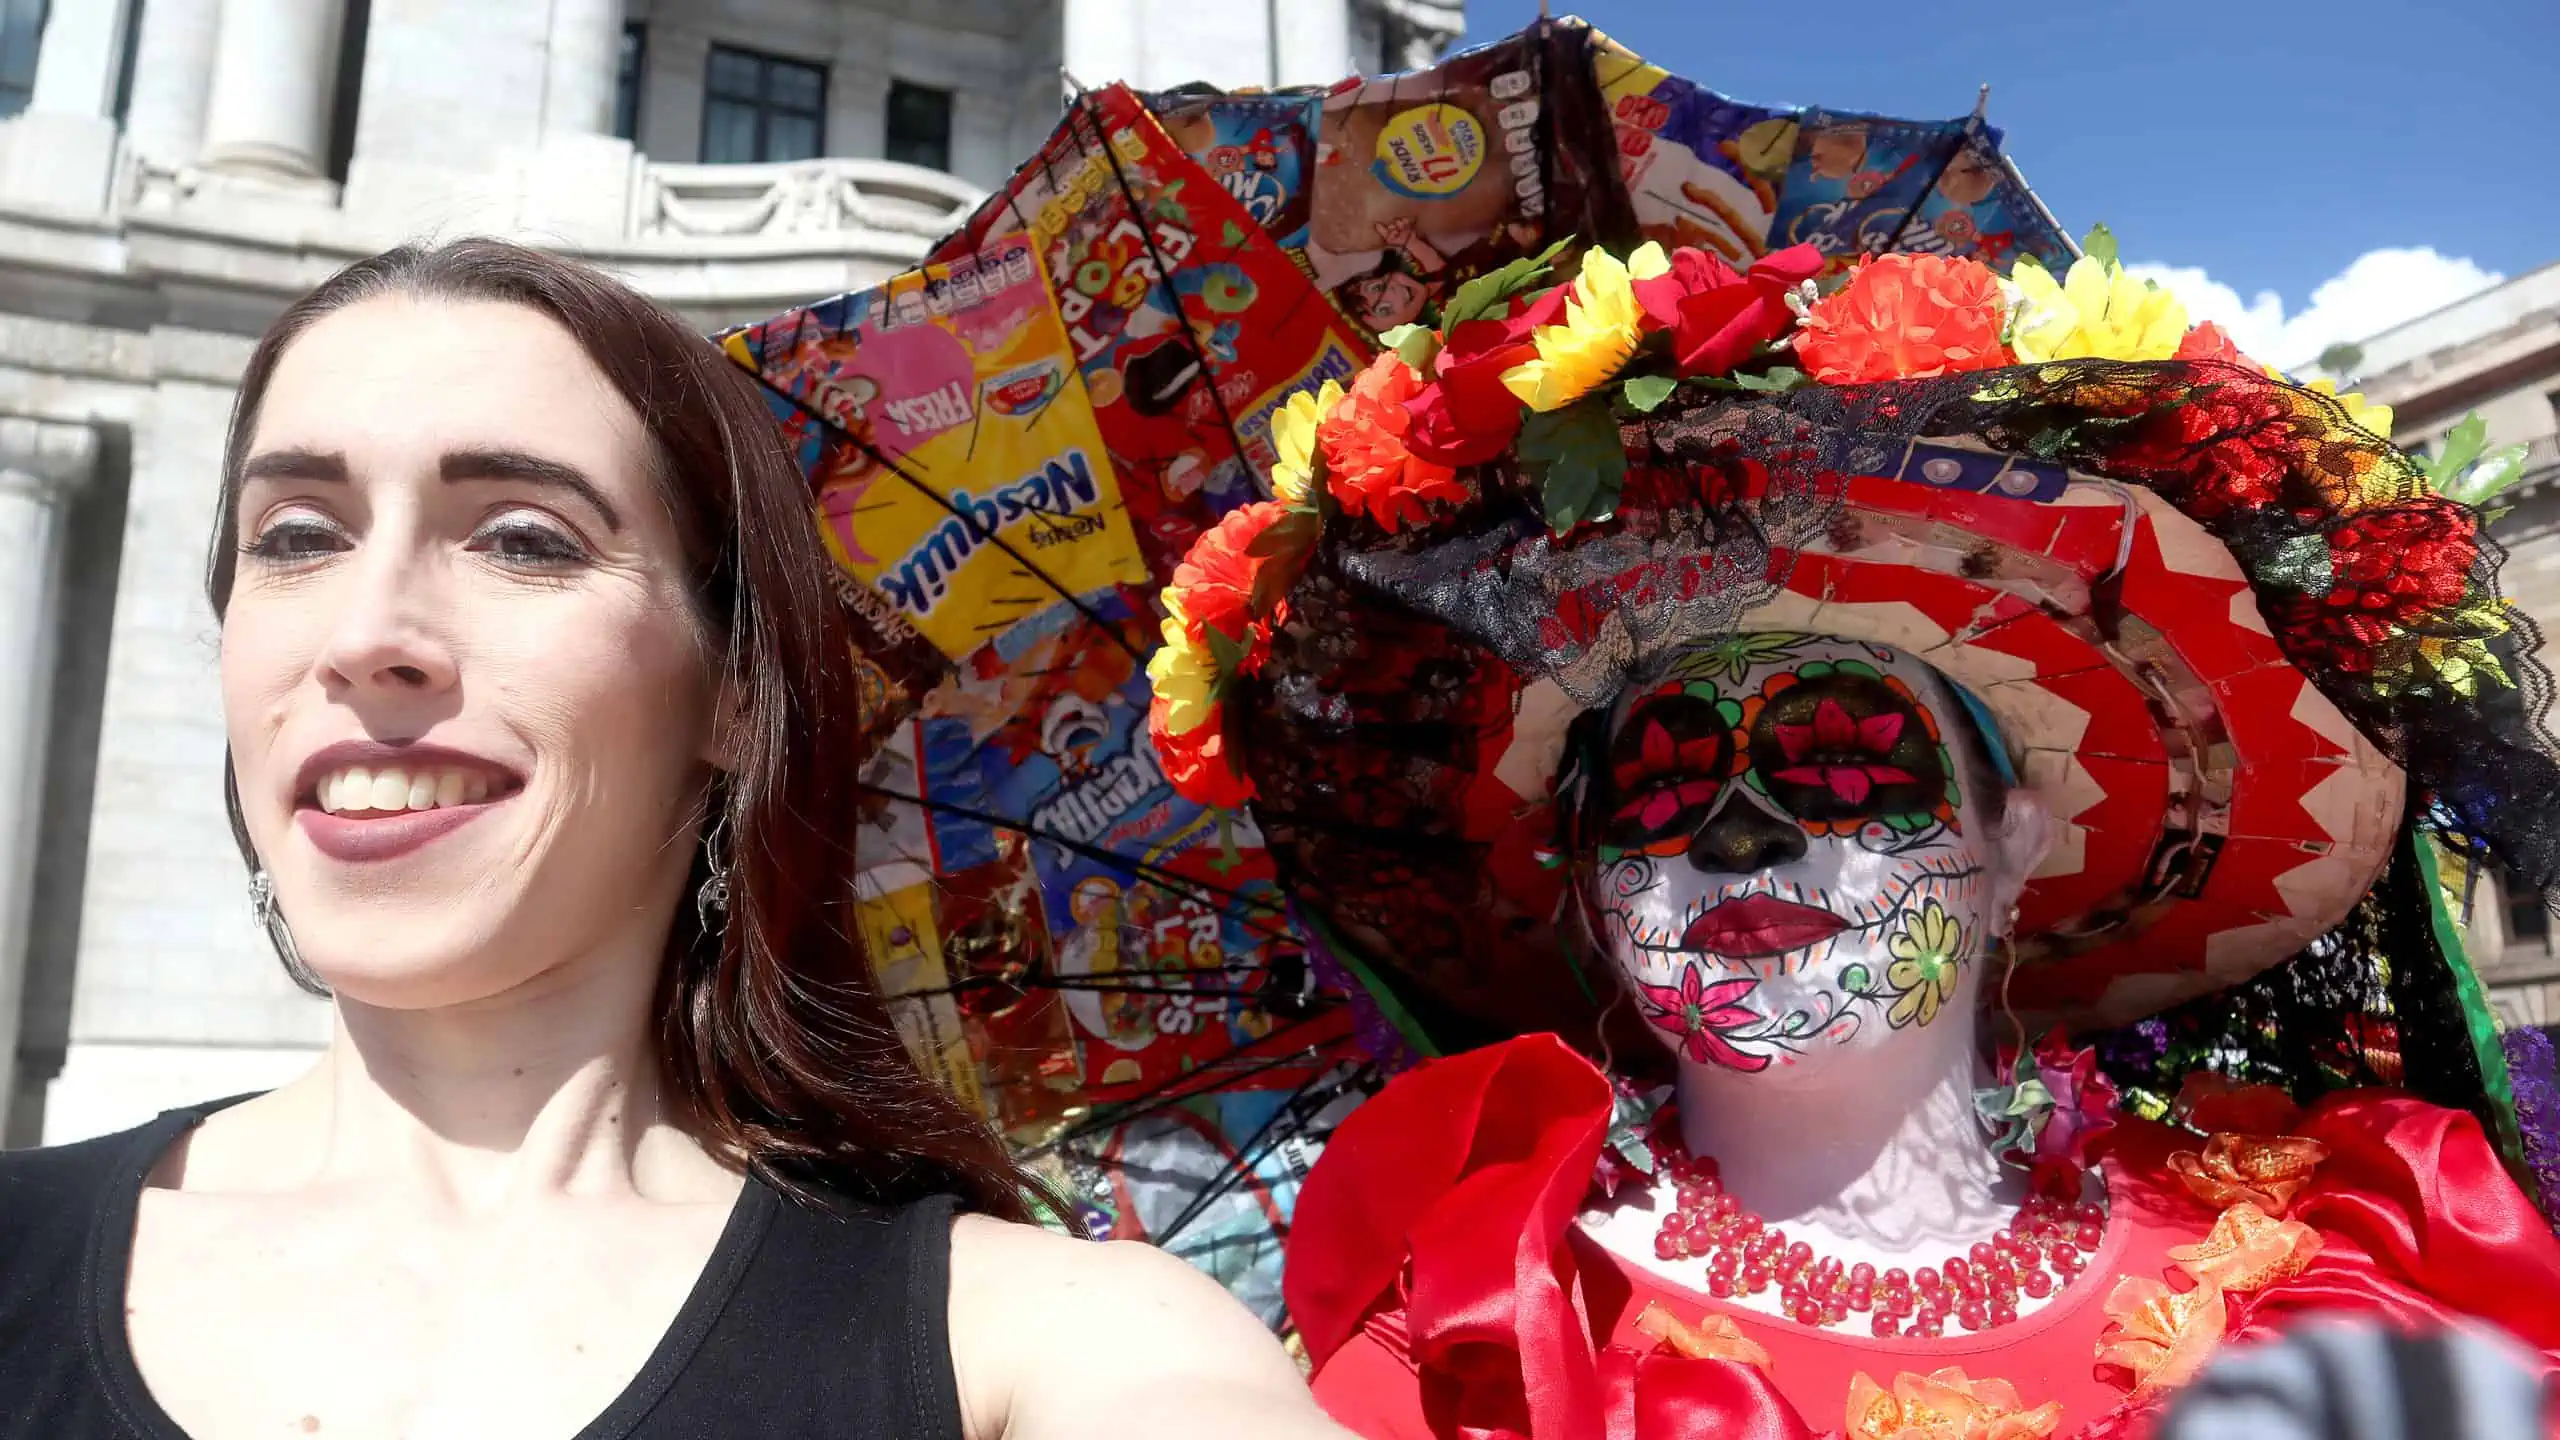 A Mexican woman in skull face paint with a fancy hat and parasol made from junk food cereal boxes with US brands poses for a selfie with Kayley Whalen.